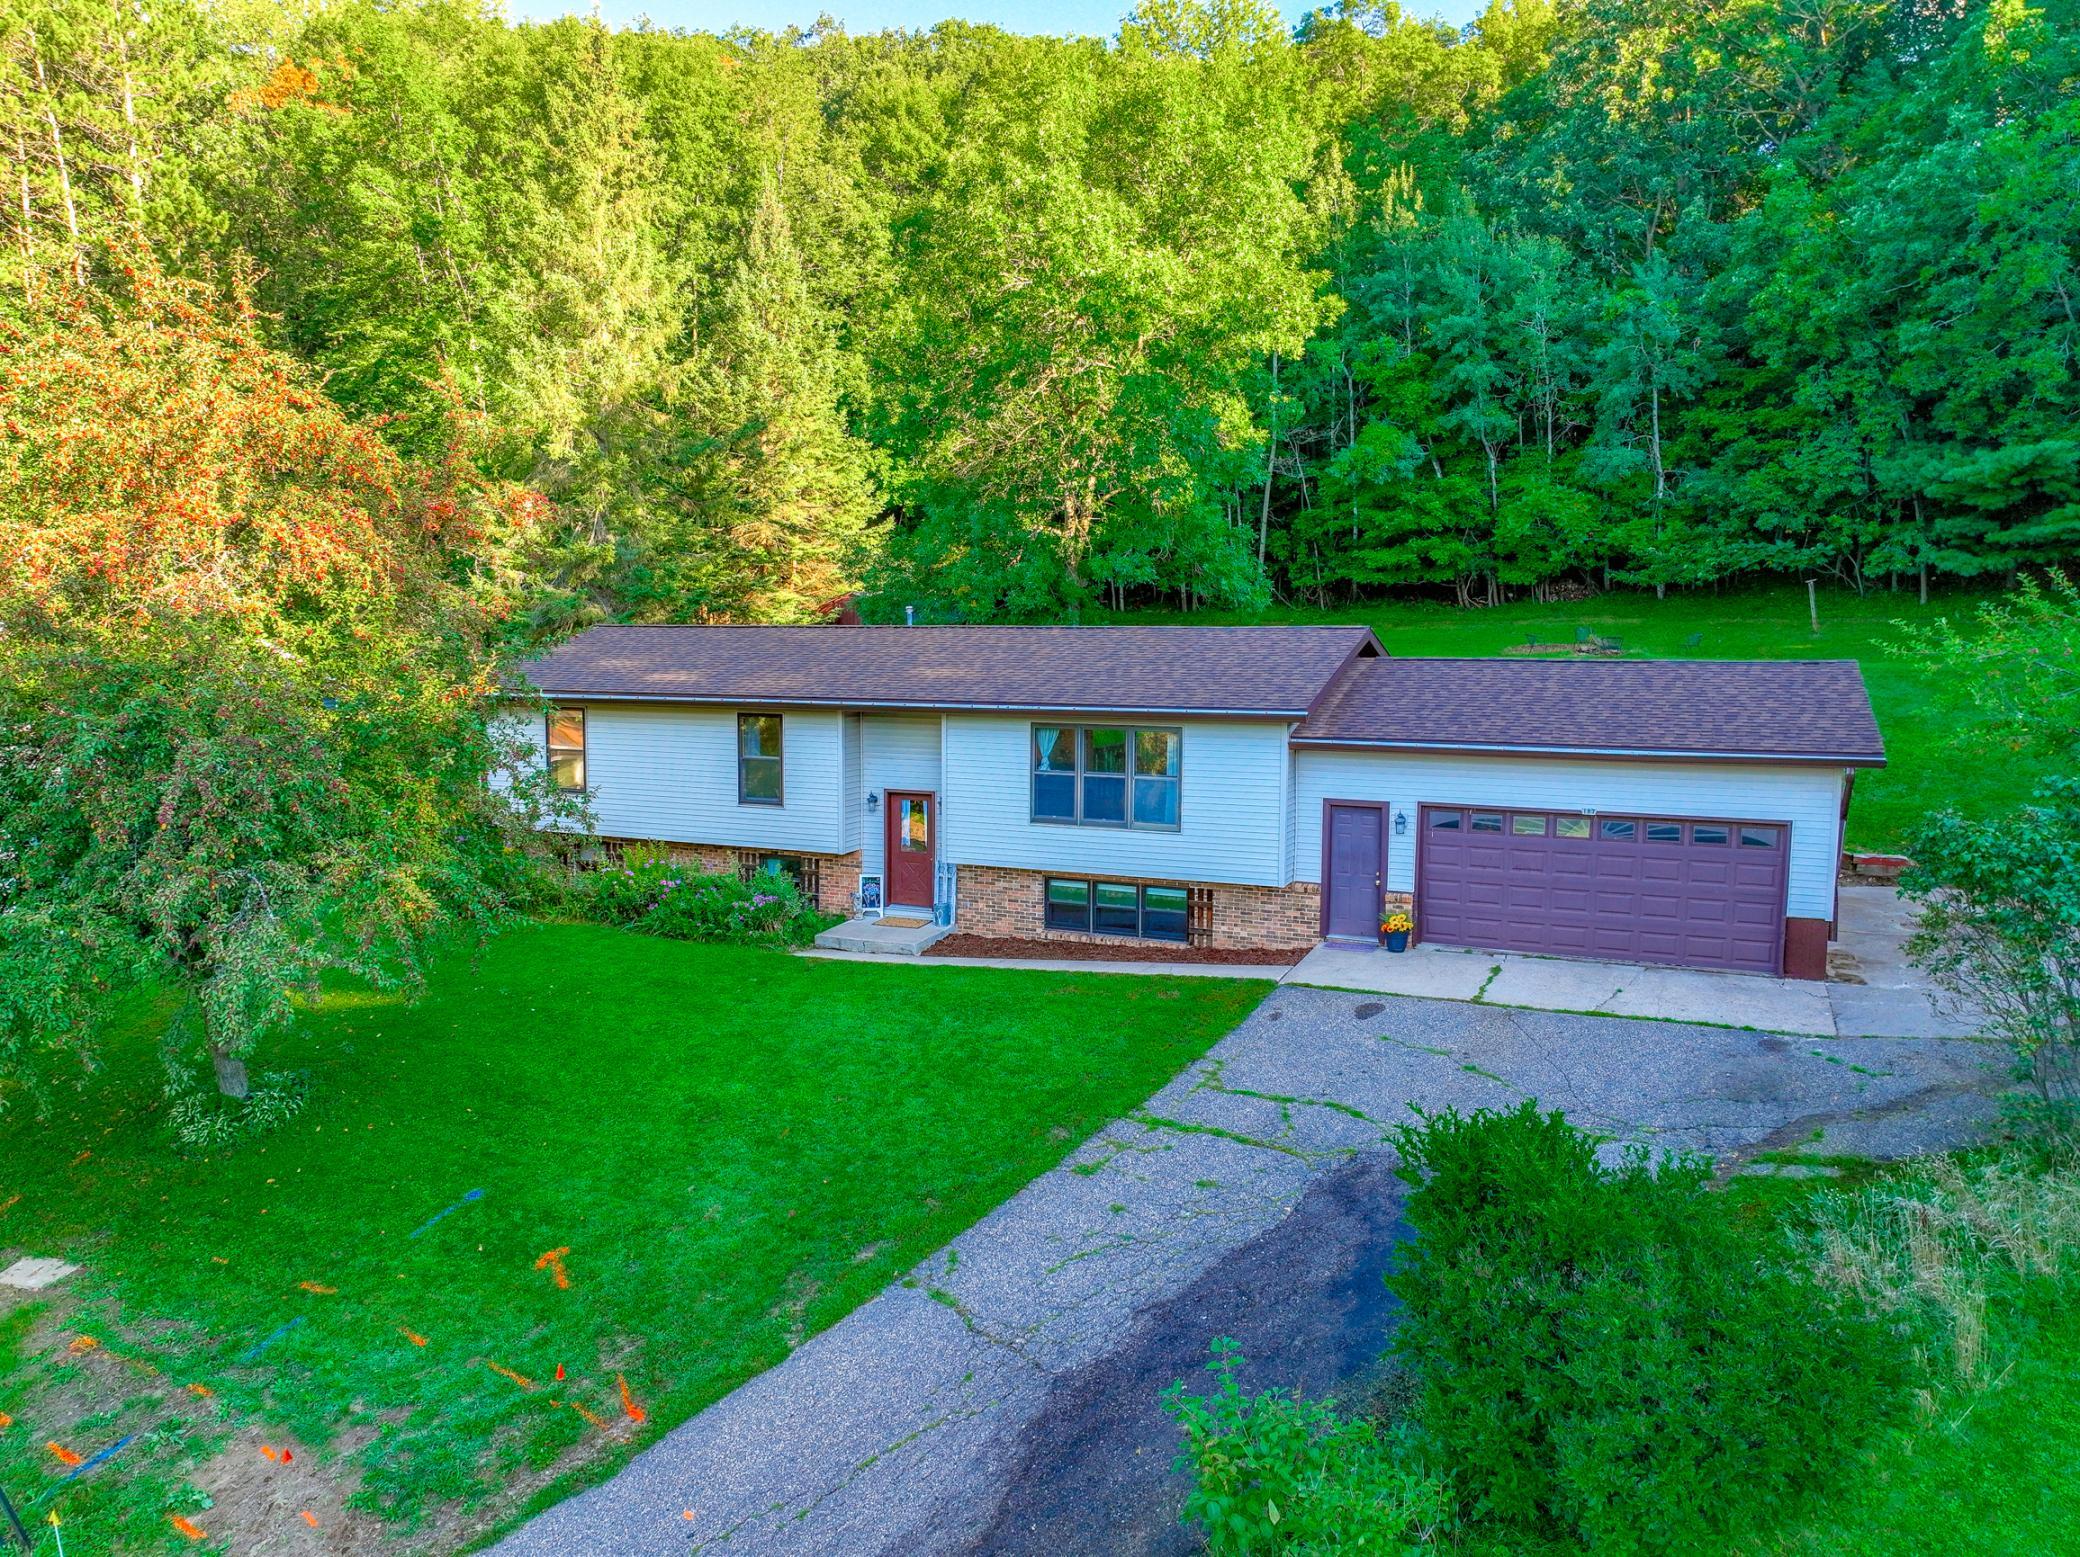 5-bedroom home tucked away on a quiet cul-de-sac with with ample privacy in the backyard with a large deck offering the perfect place to relax and enjoy nature.